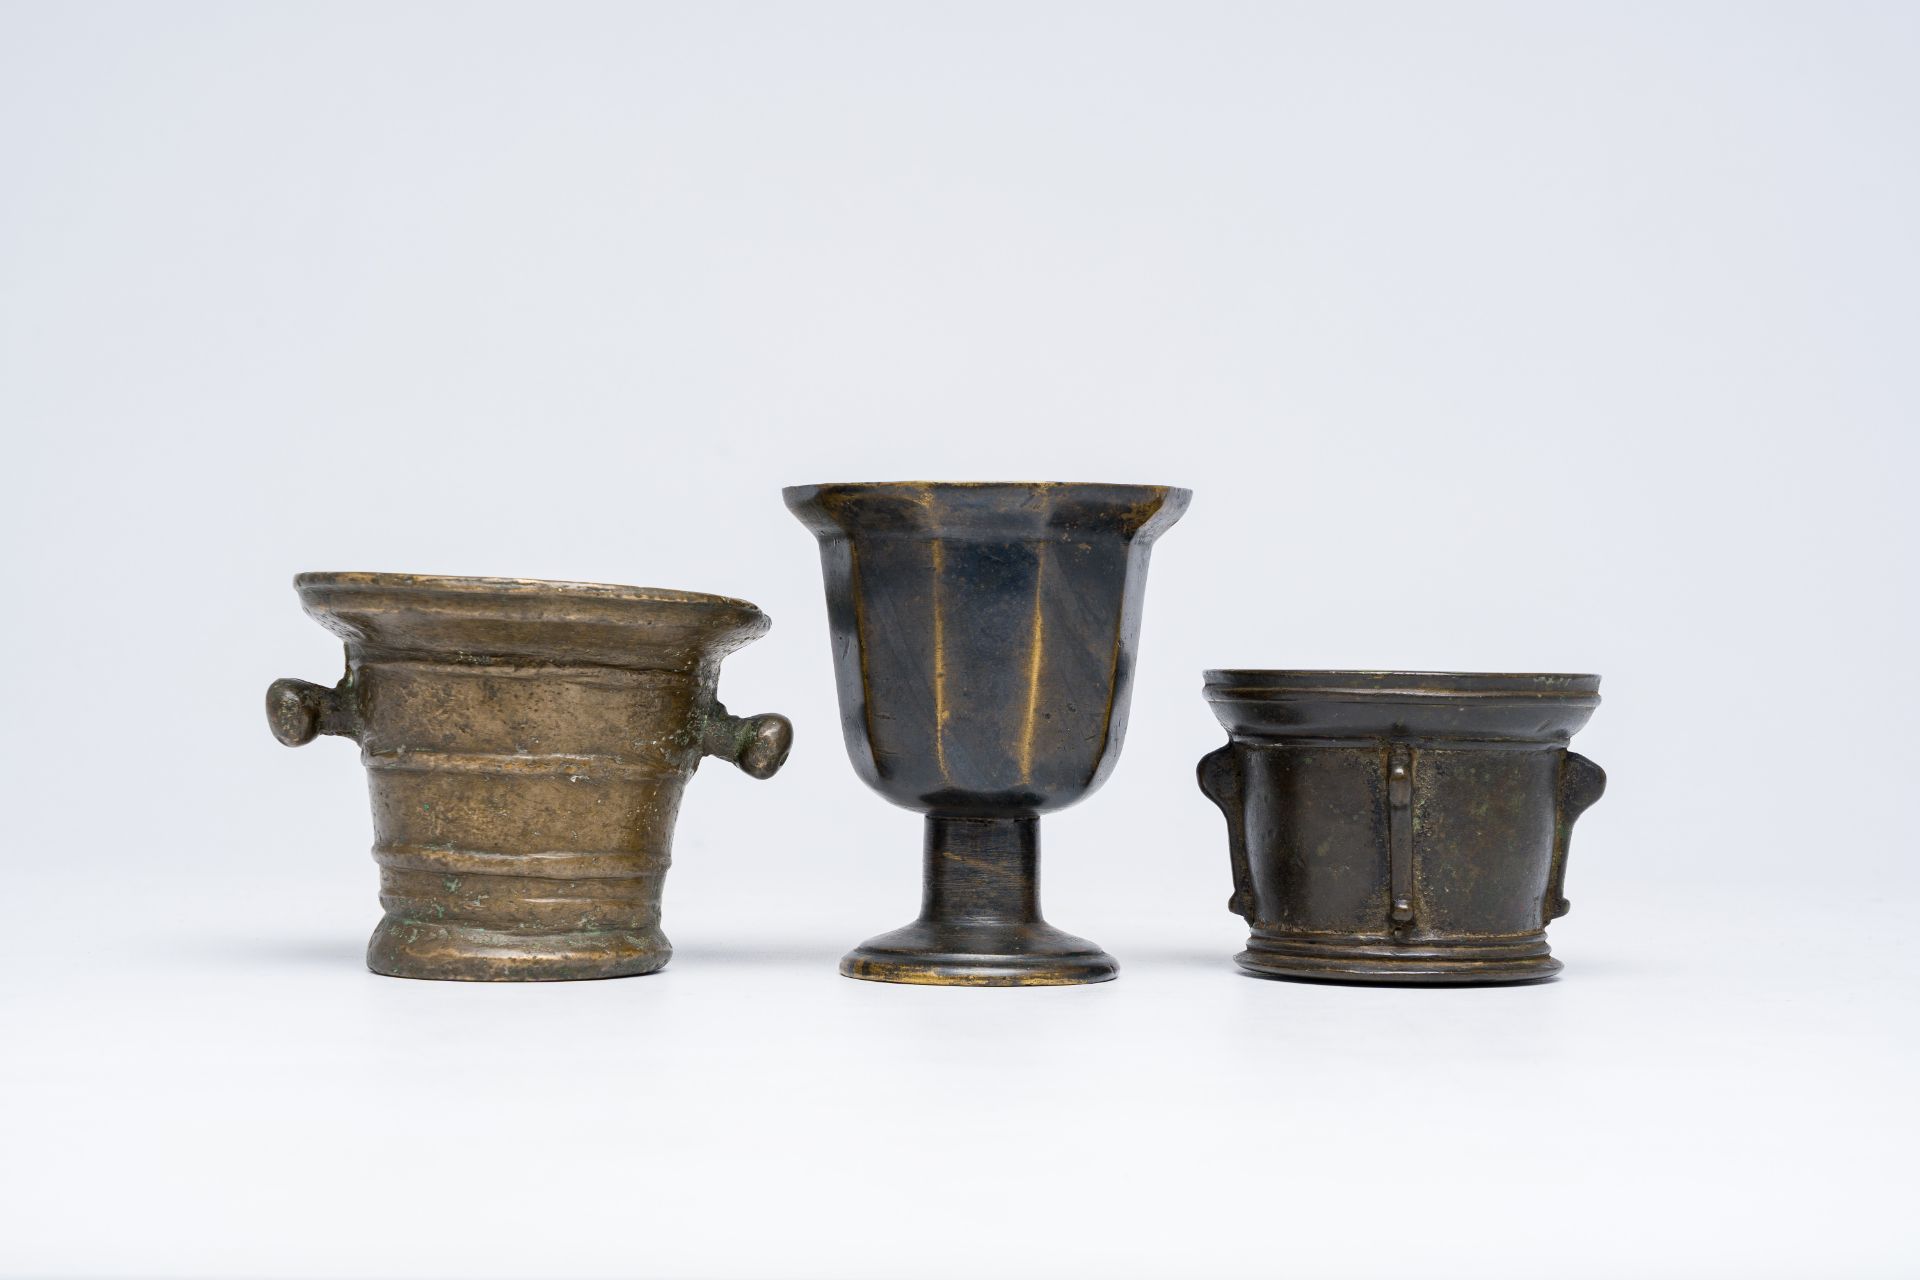 Two bronze mortars and a footed goblet, France and/or Italy, 16th C. - Image 4 of 7